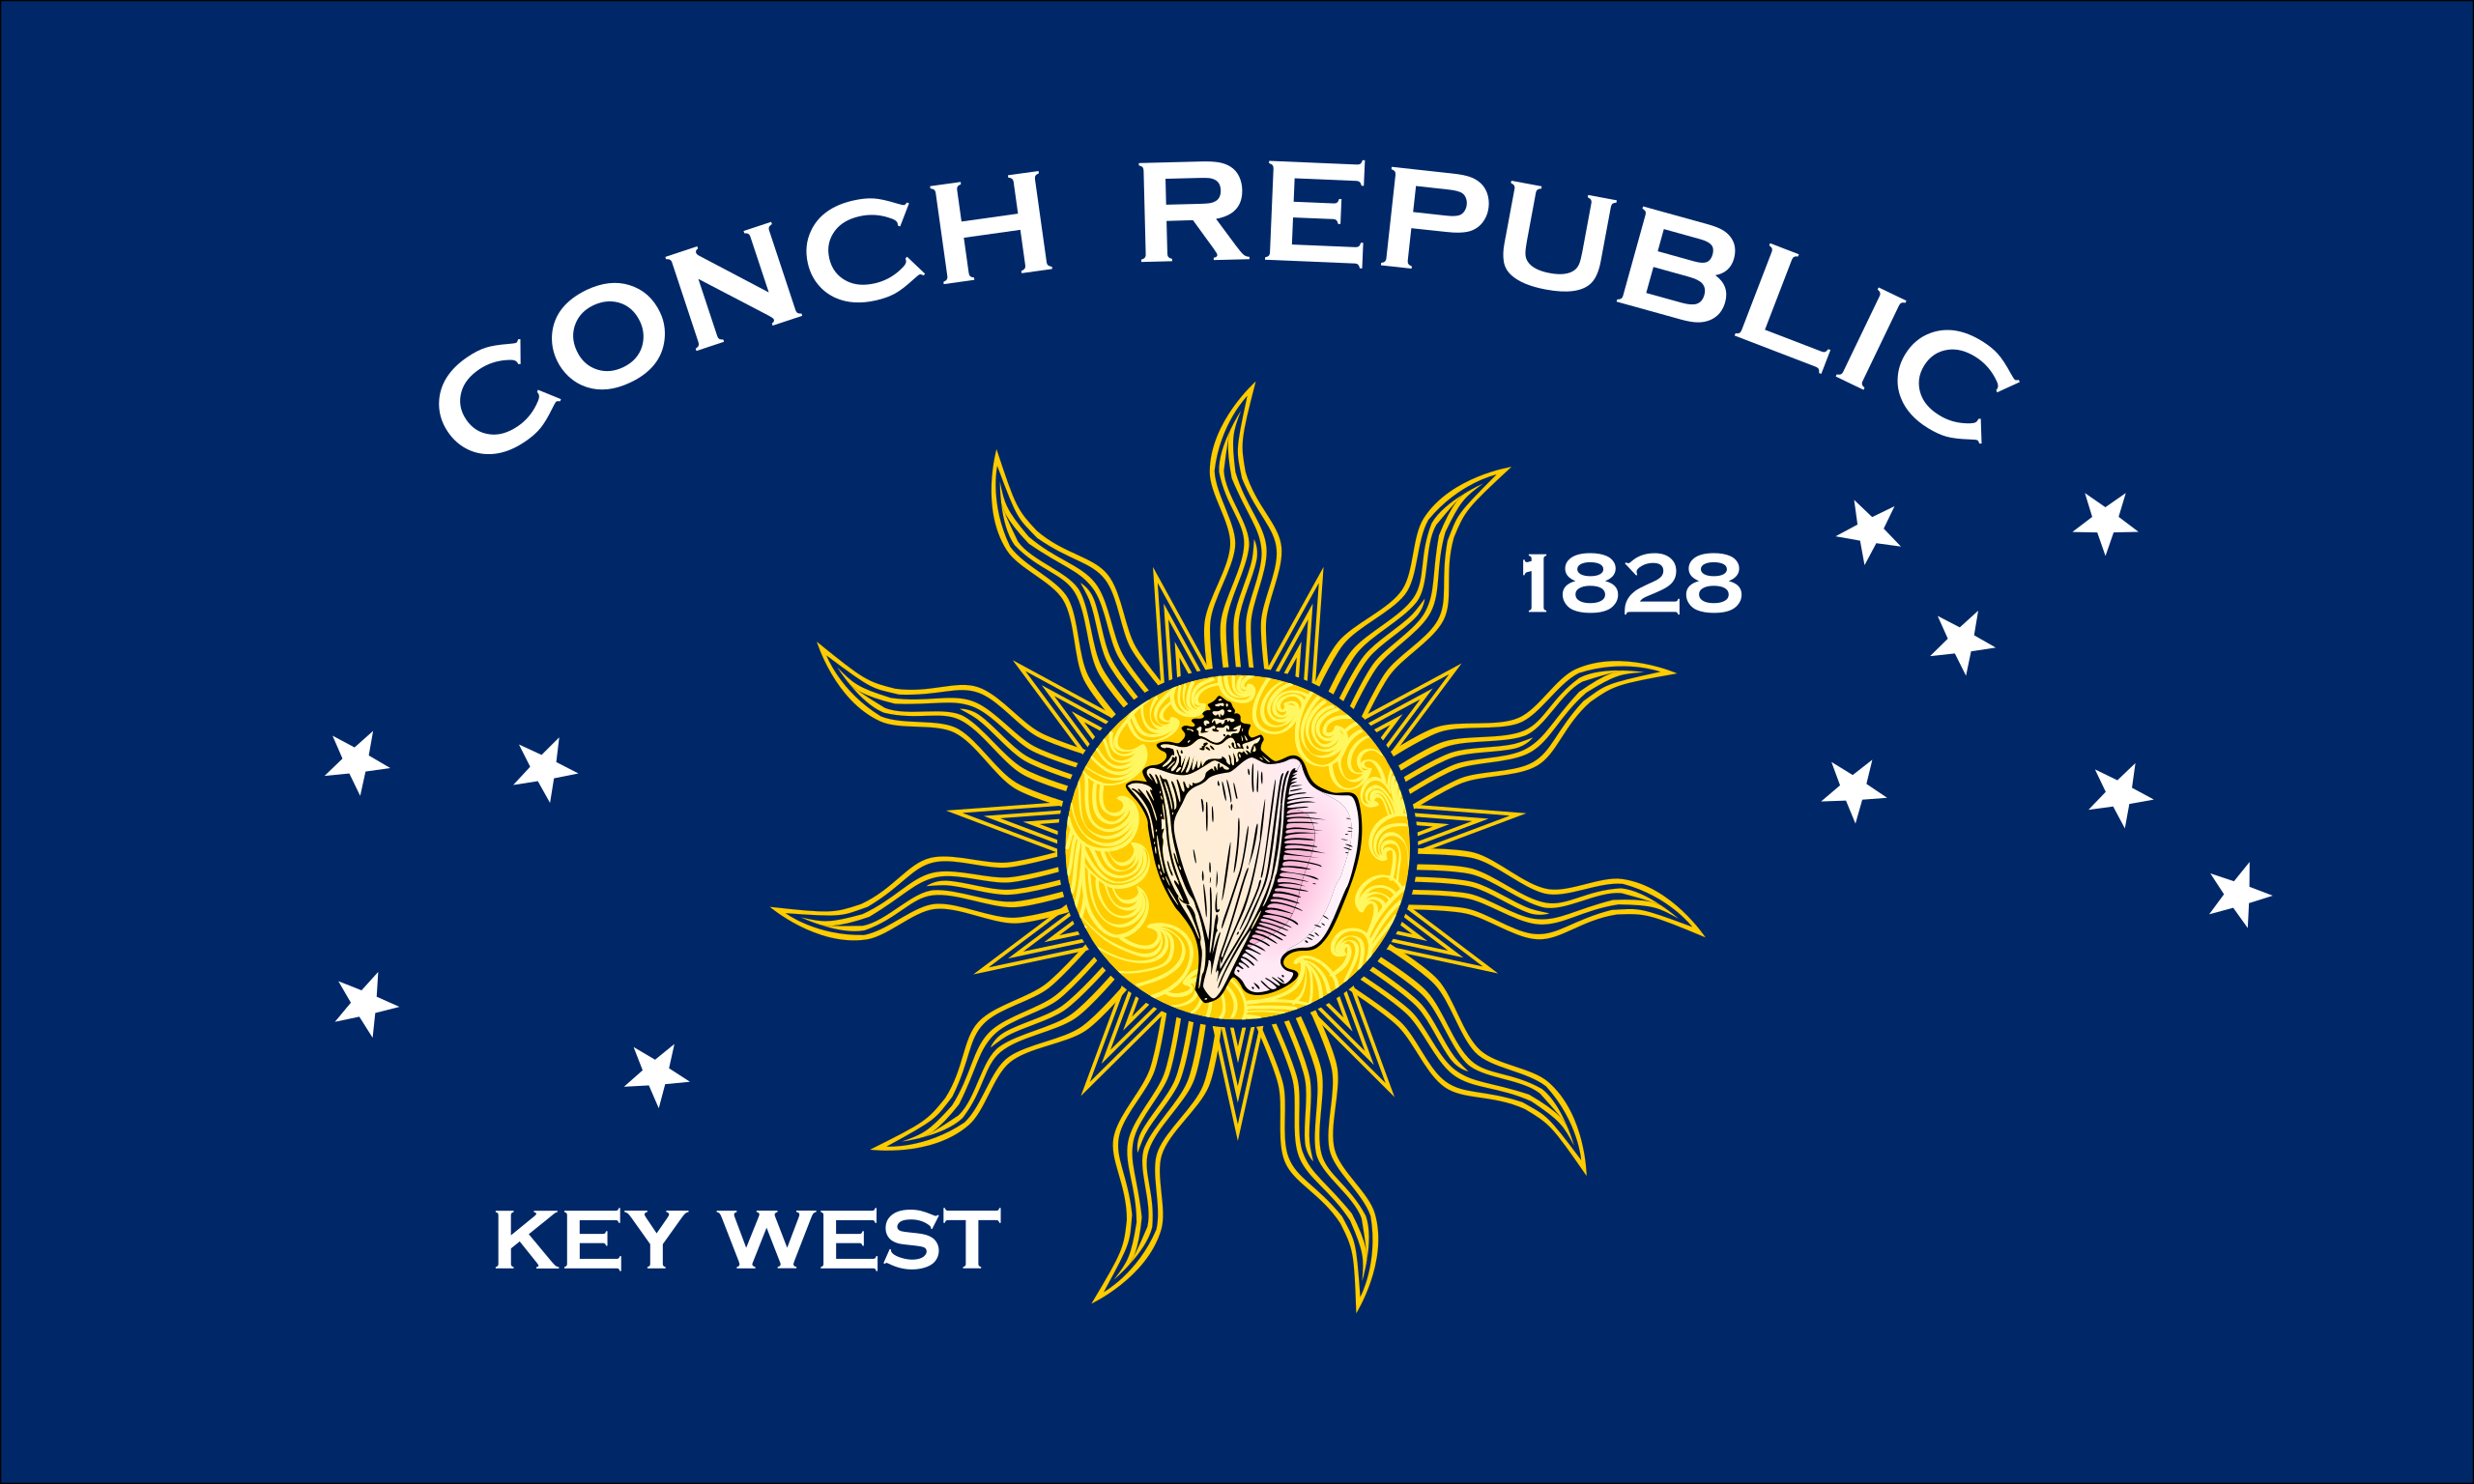 Conch Republic Independence Celebration 42nd Annual April 20 29